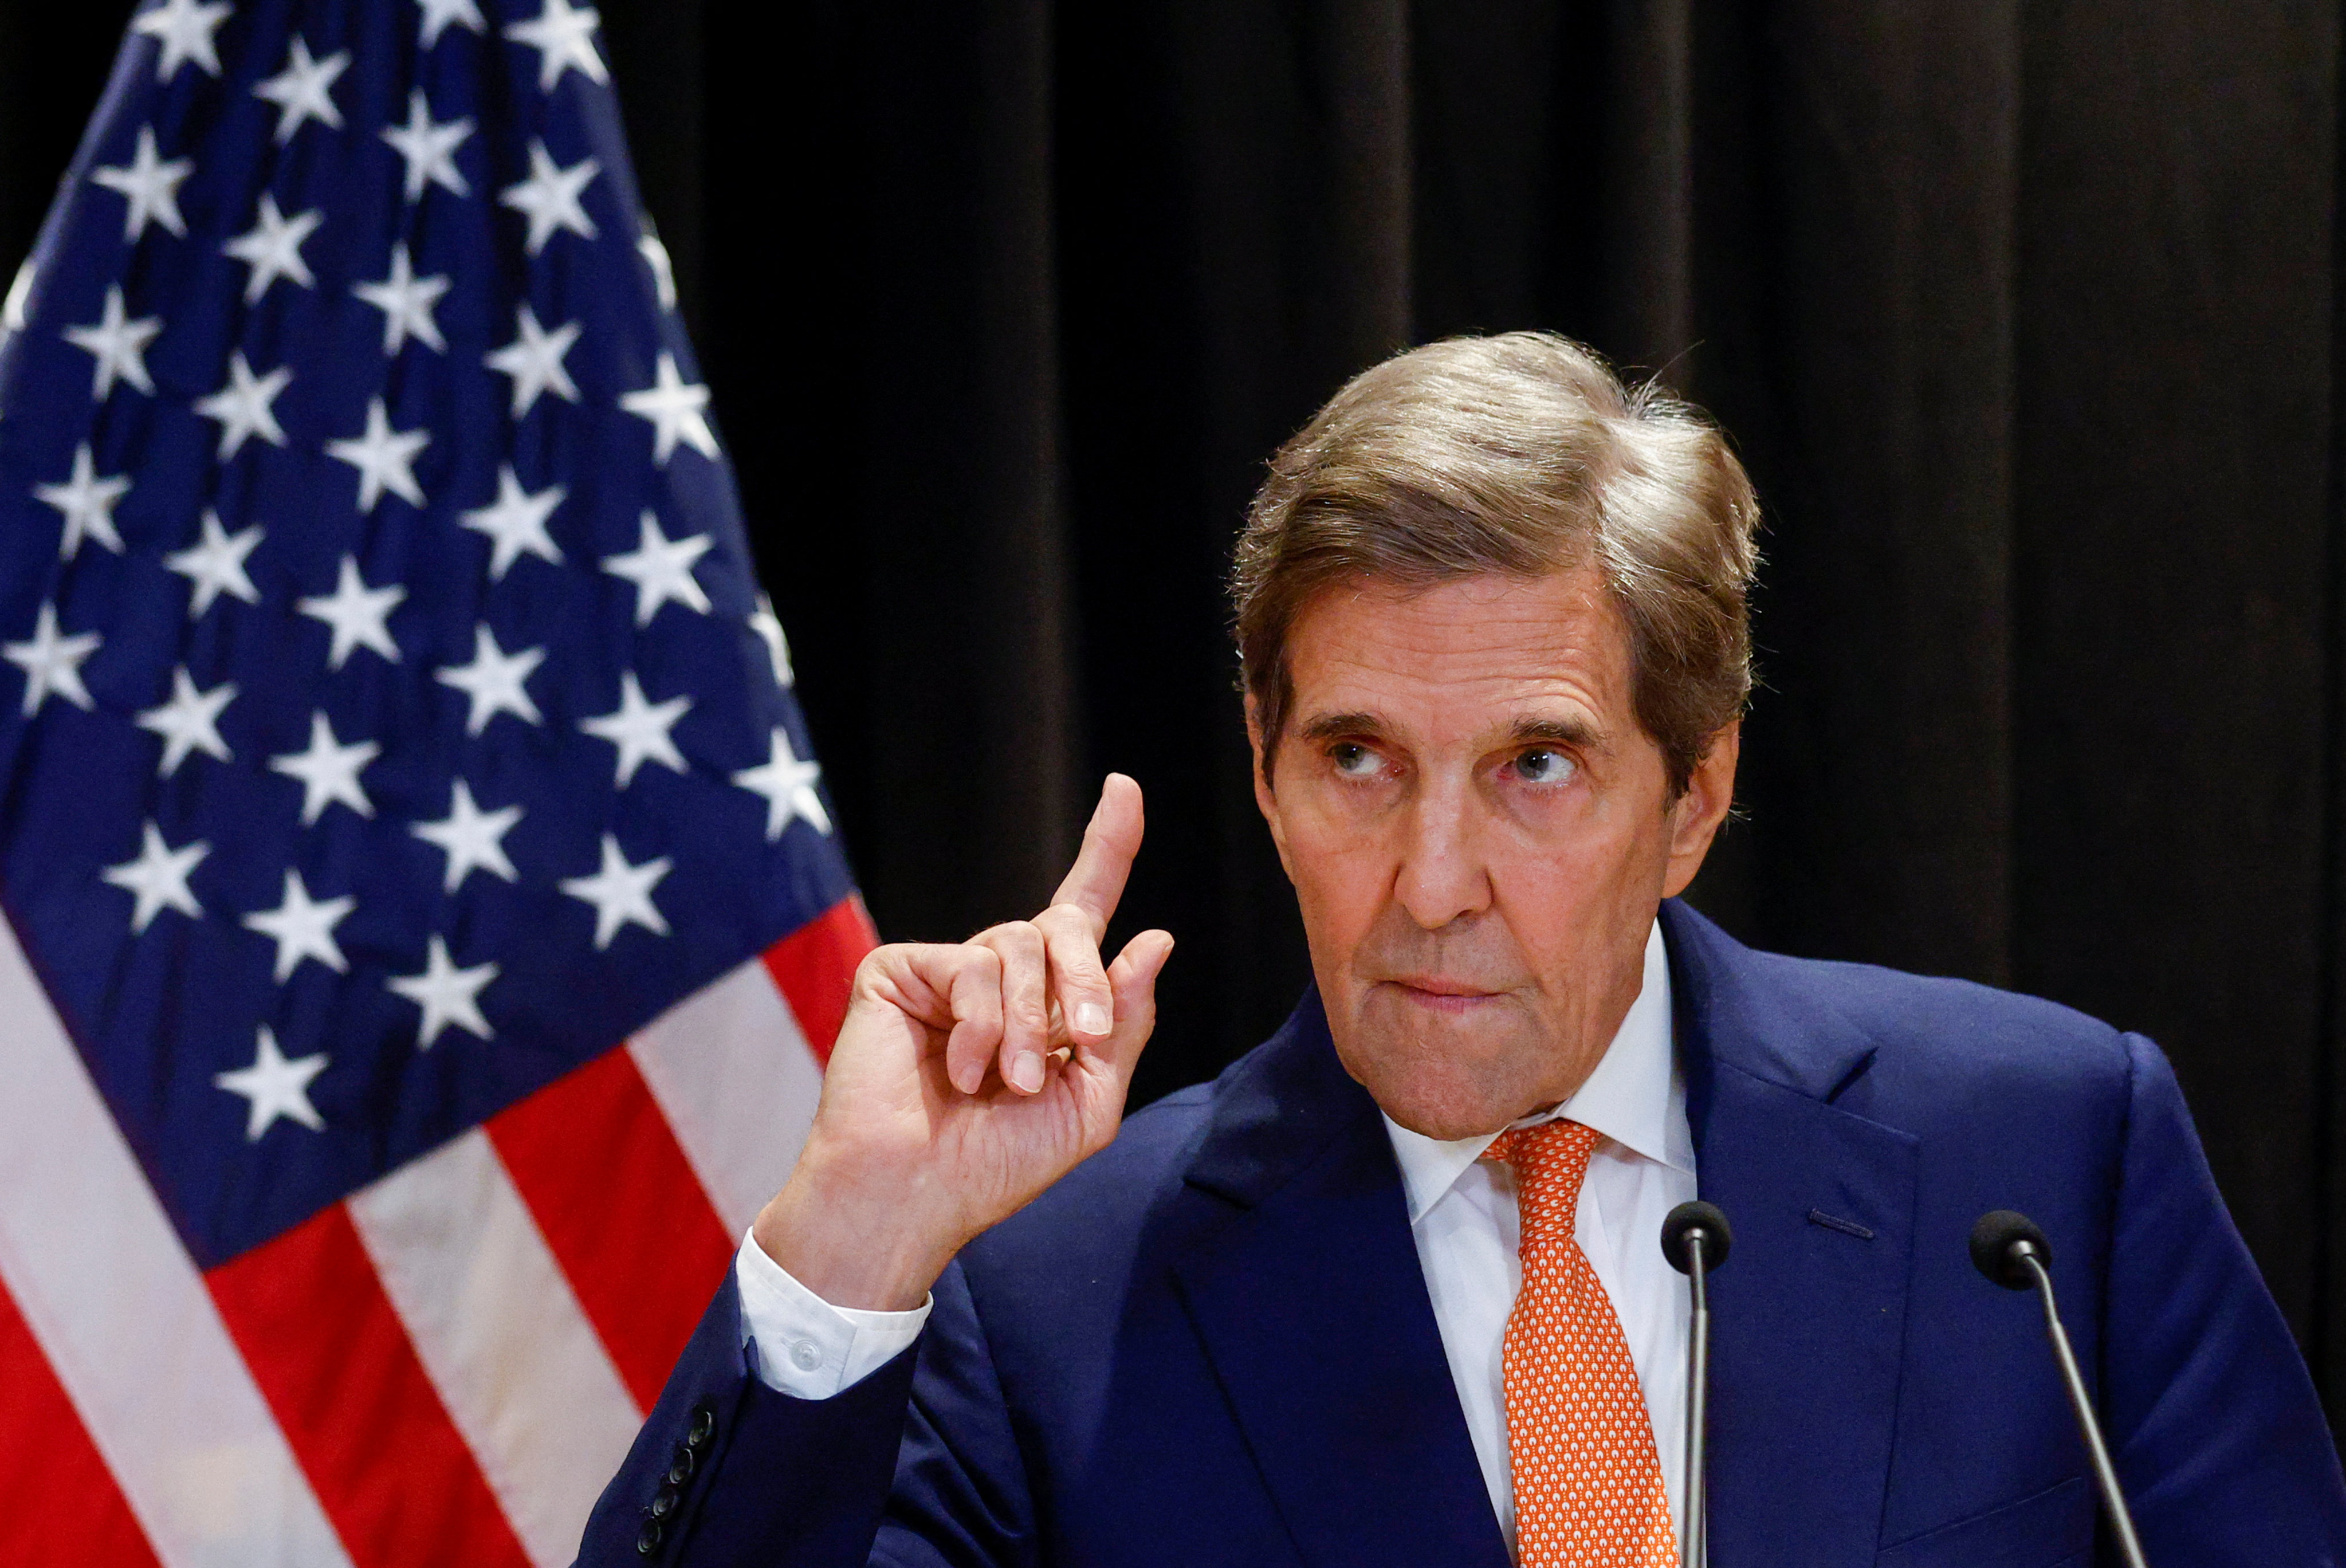 John Kerry, the US special envoy on climate issues, attends a press conference in Beijing, China in July. Photo: Reuters